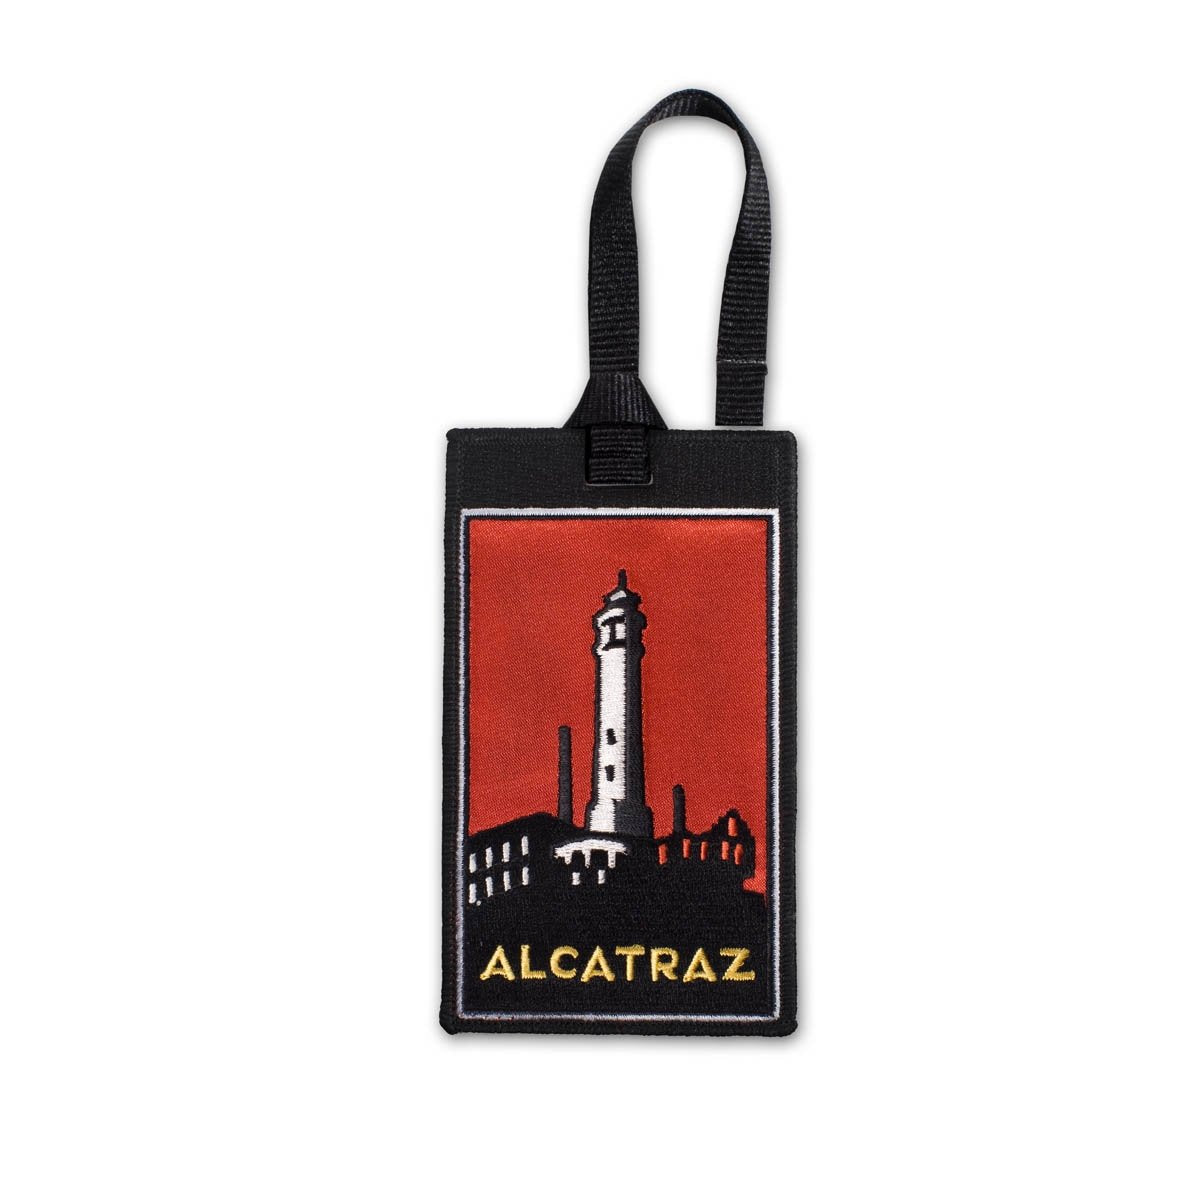 Multicolor embroidered luggage tag with design of Alcatraz lighthouse, based on artwork by Michael Schwab.